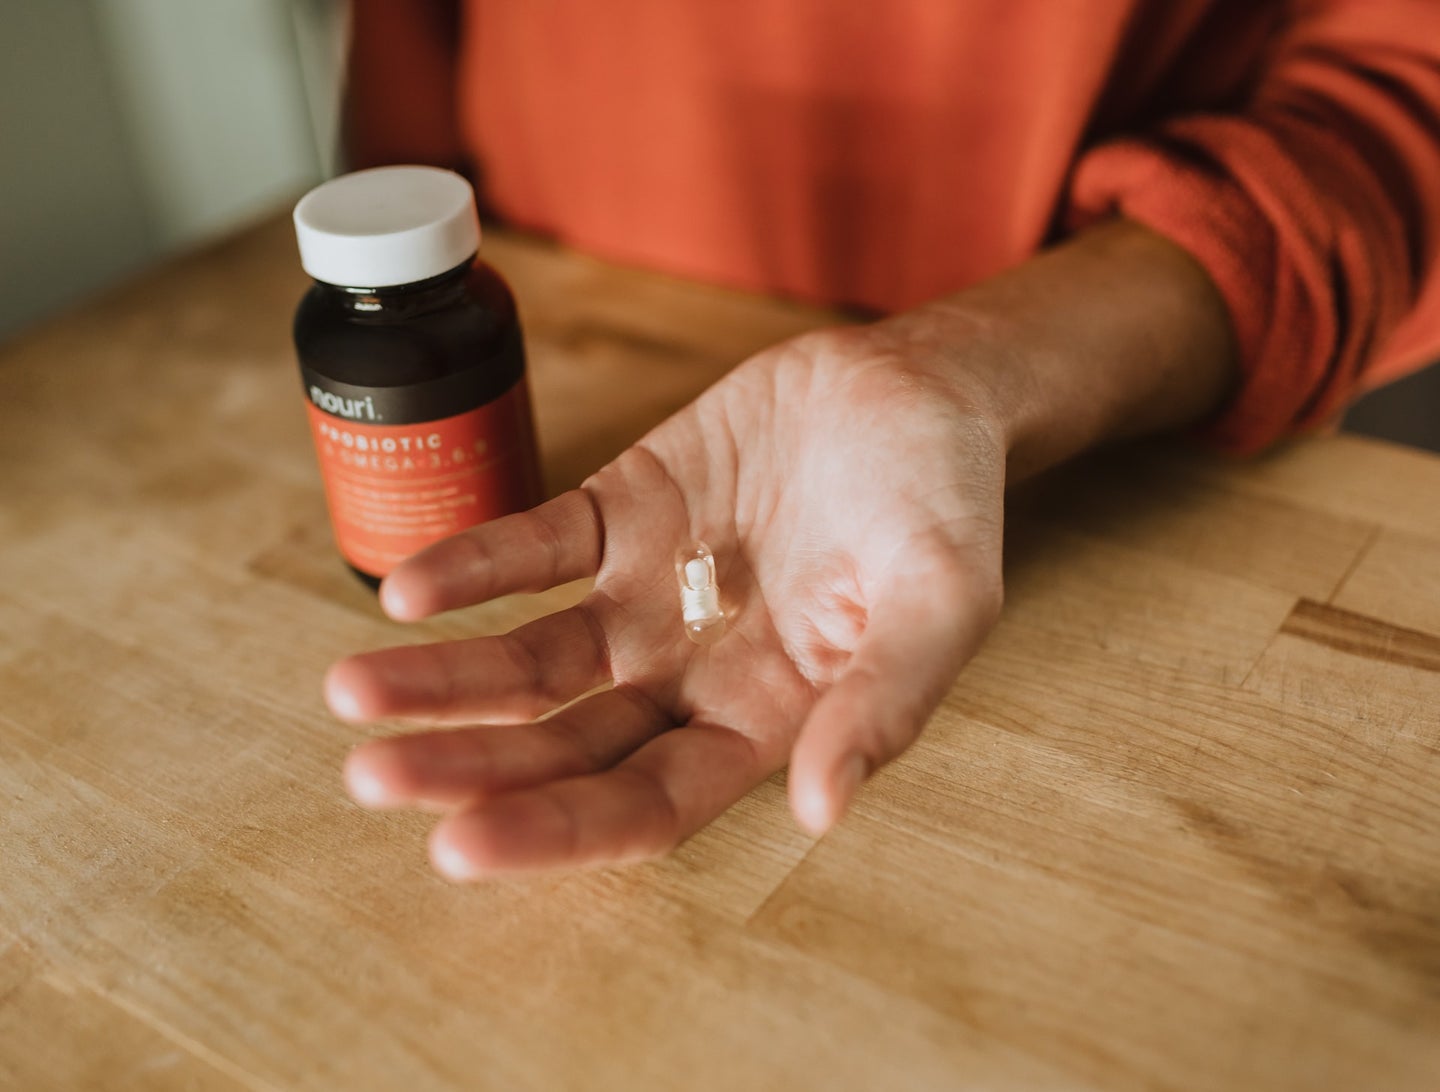 Person in an orange shift holding a white probiotic pull next to a brown vitamin bottle